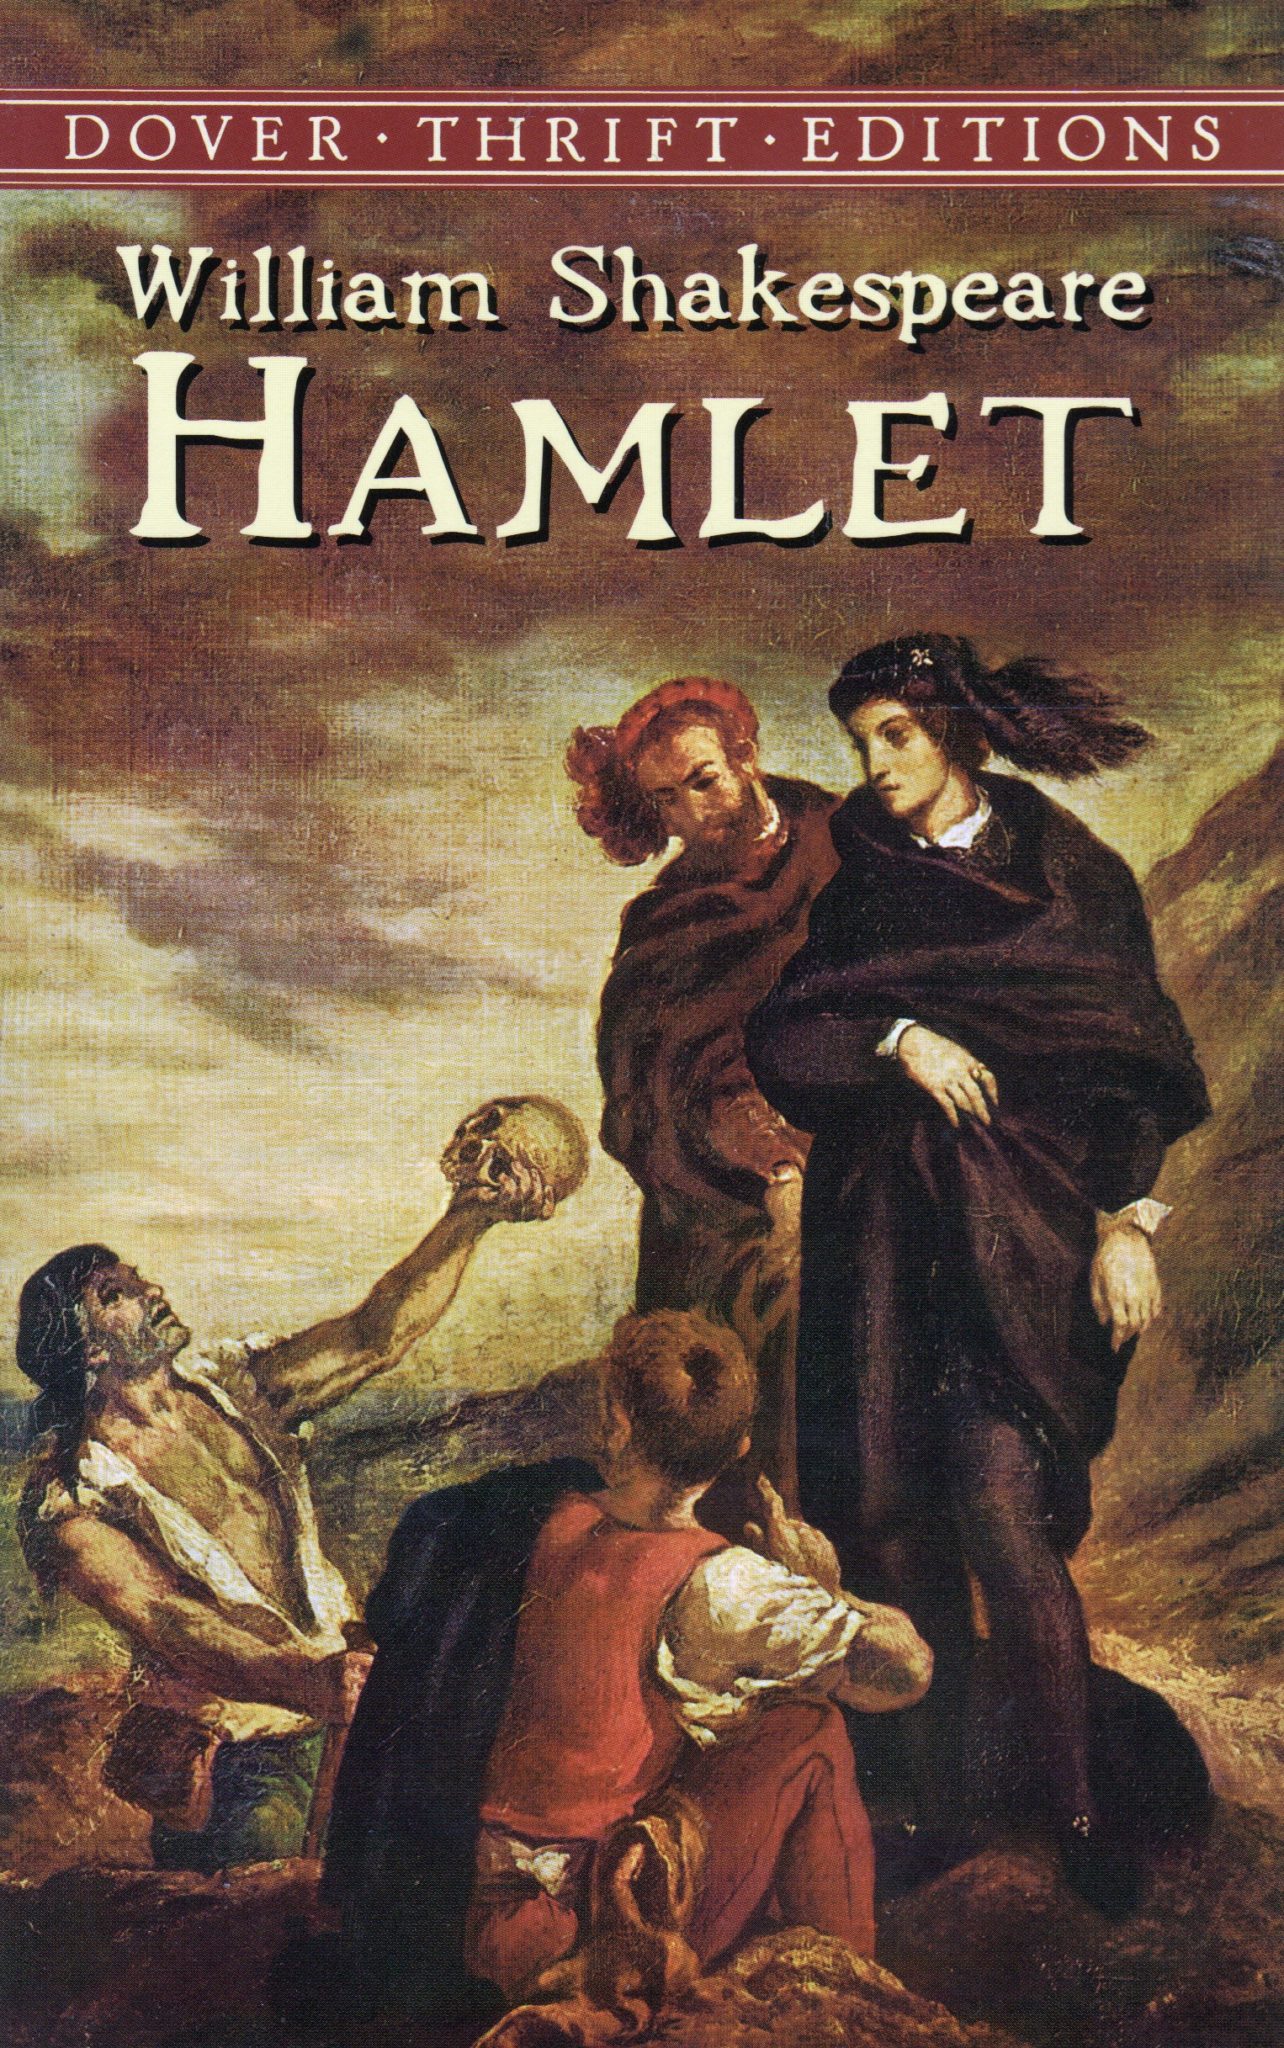 hamlet's famous speeches are called